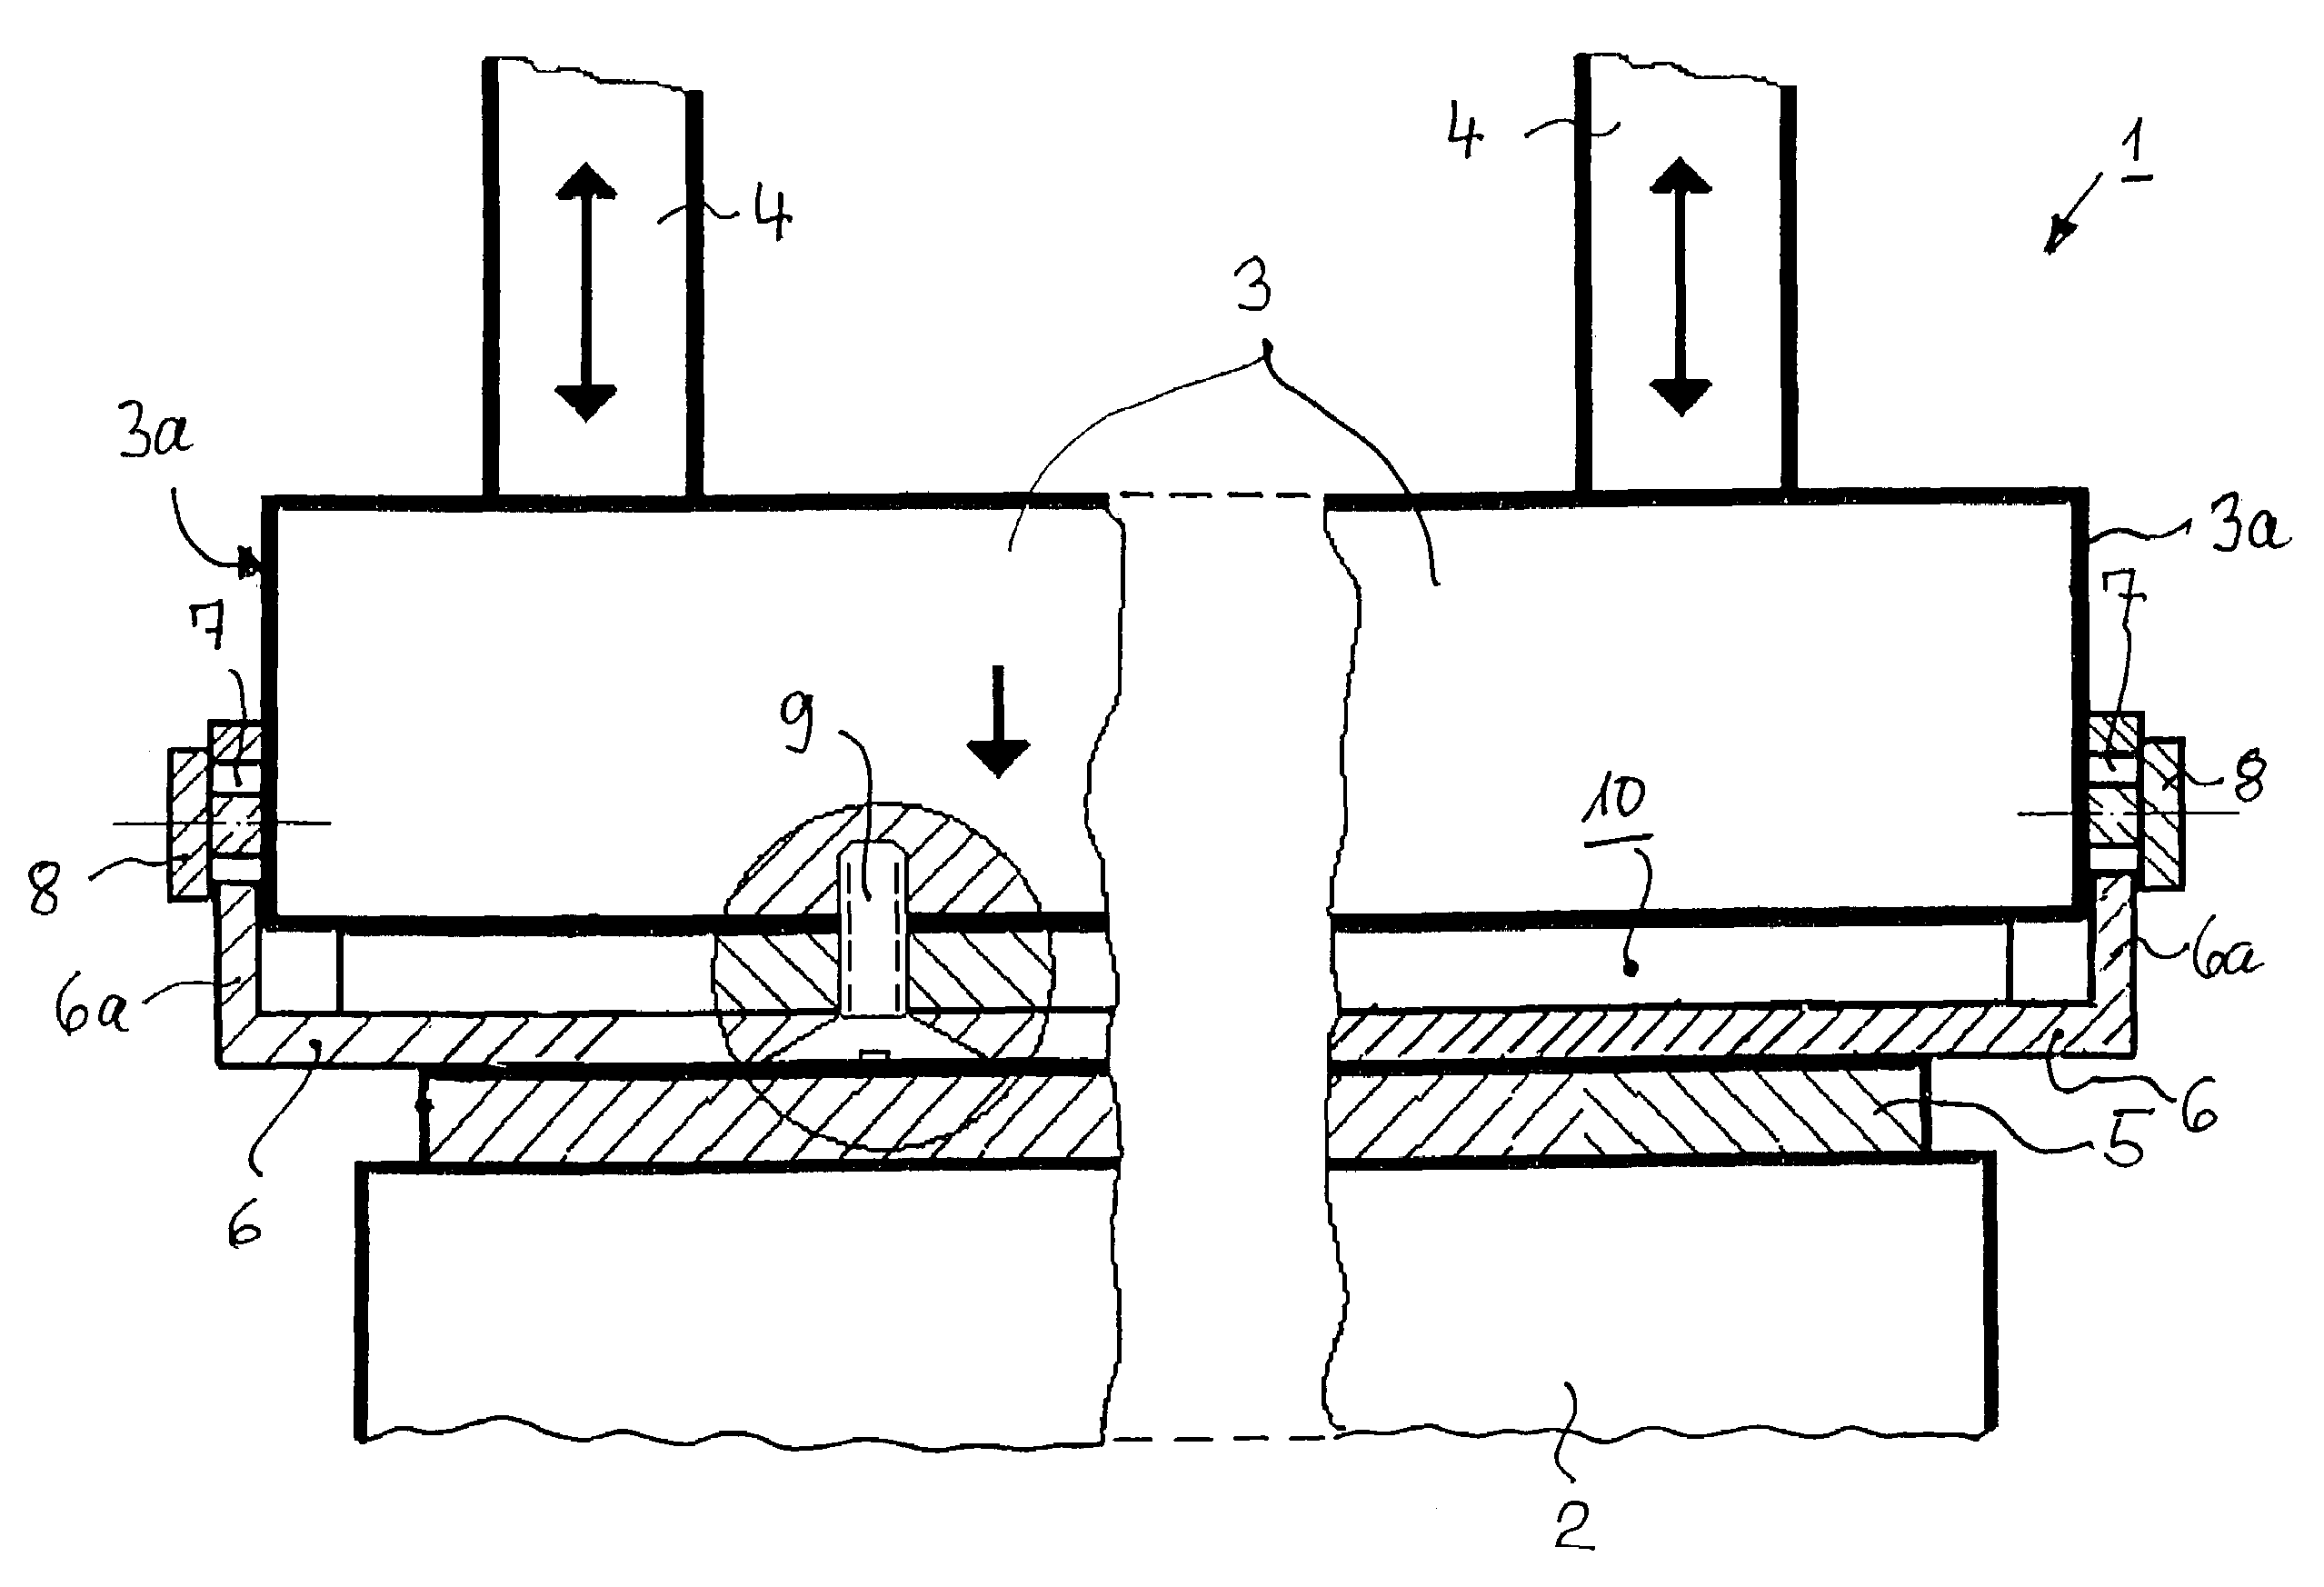 Hot pressing apparatus with a pressure plate and at least one resilient lining